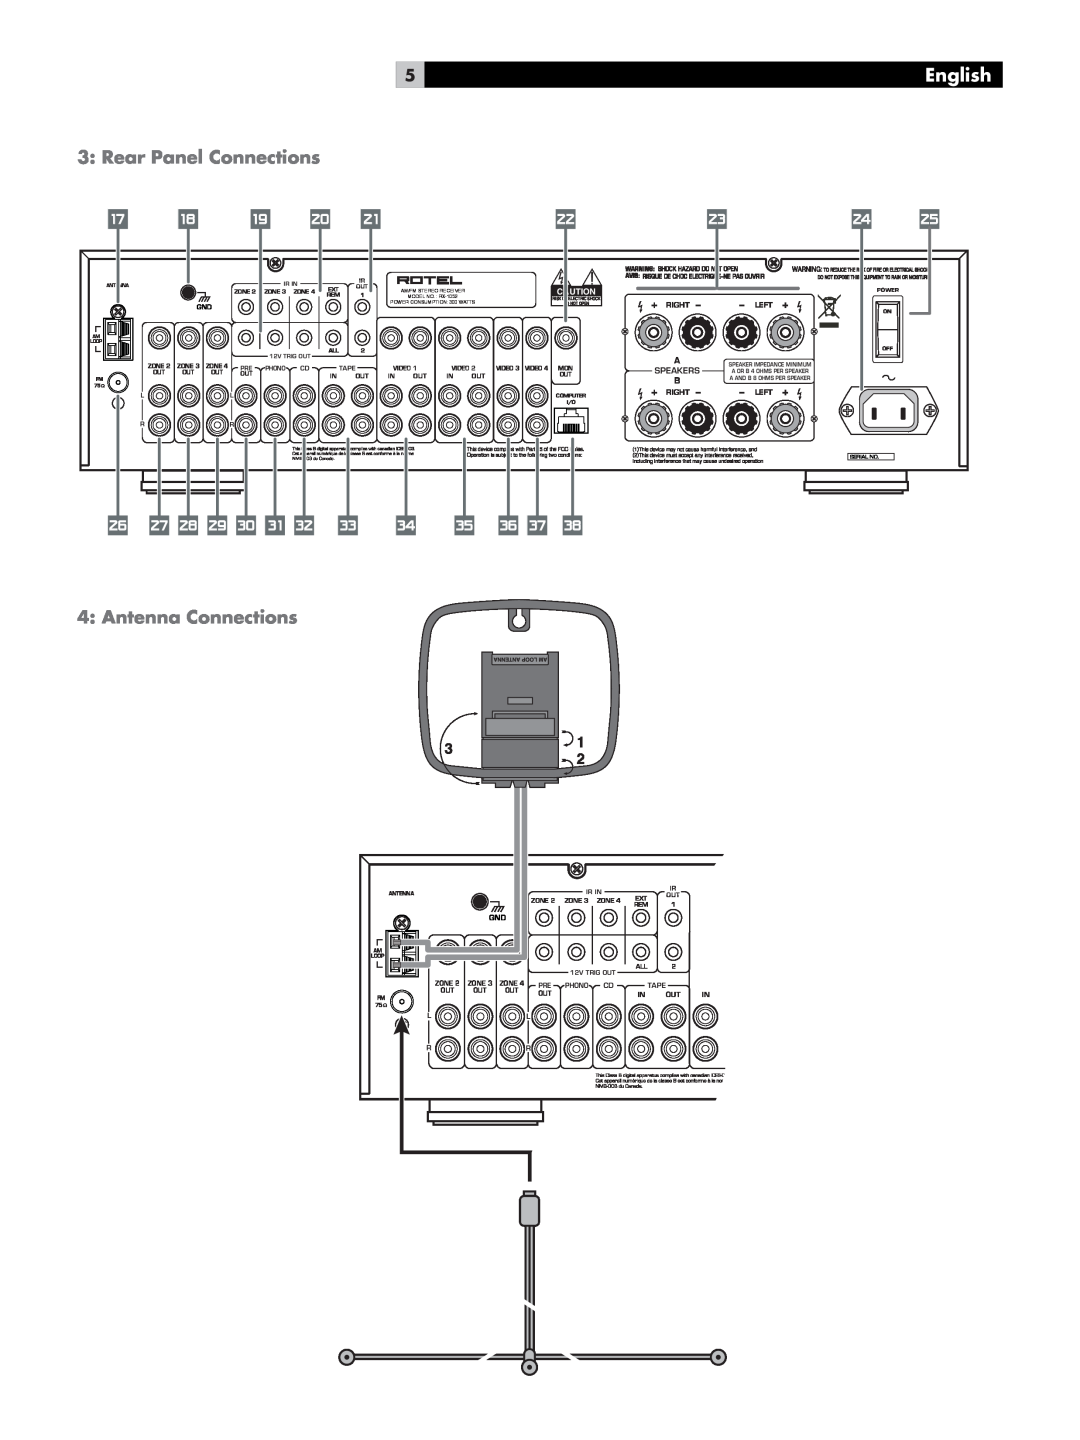 Rotel owner manual Rear Panel Connections, Antenna Connections, English, Am/Fm Stereo Receiver, MODEL NO. RX-1052 